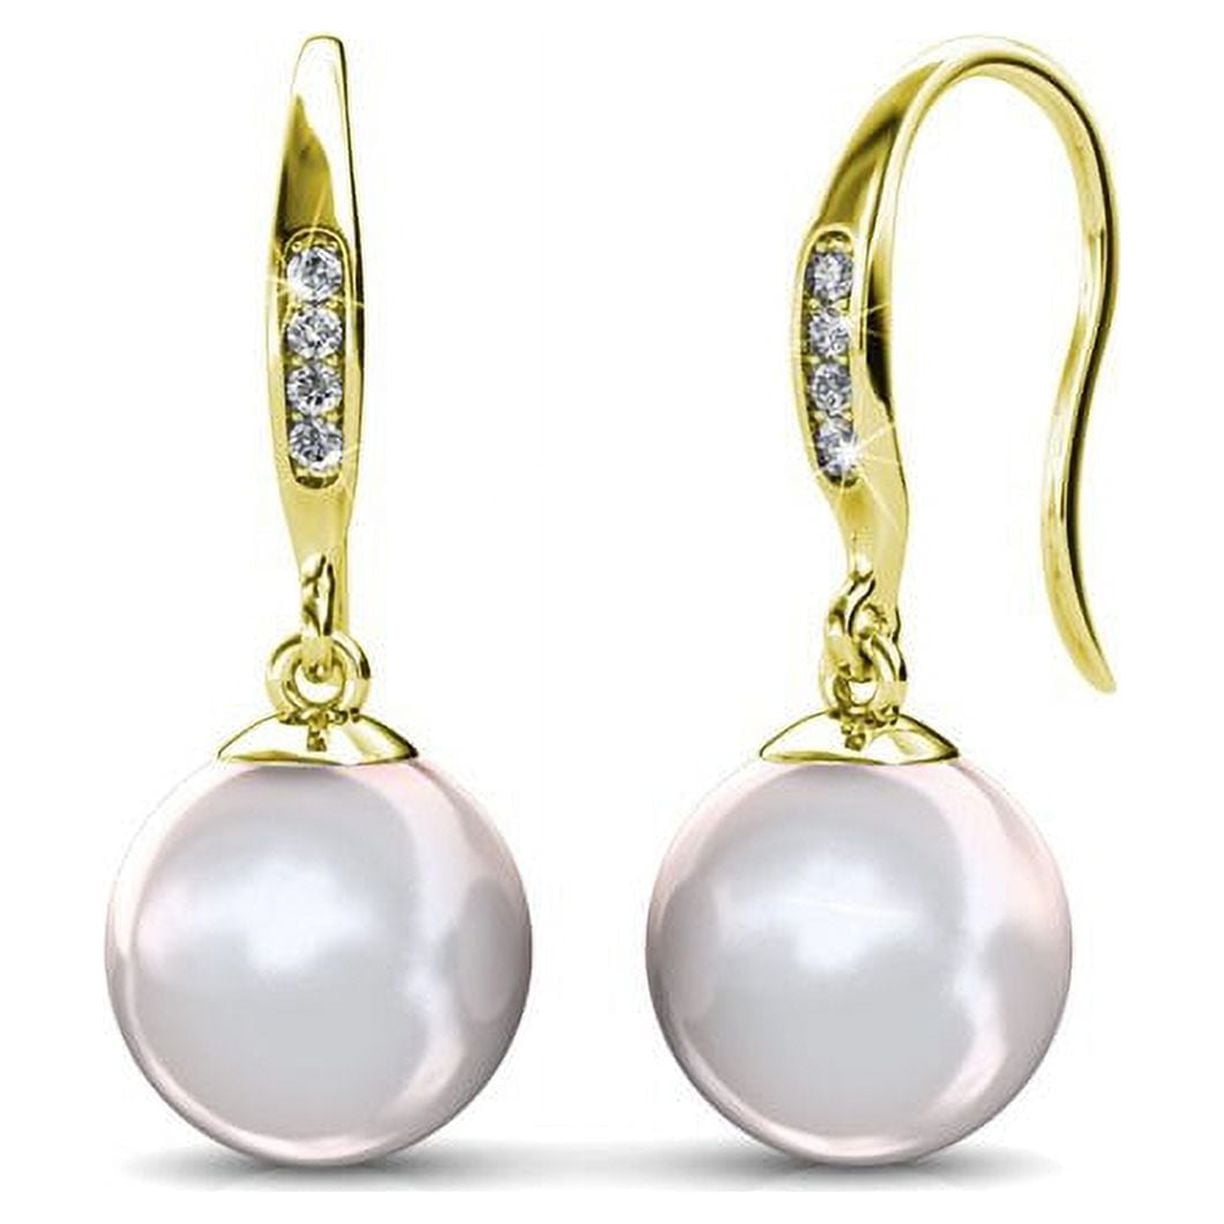 Cate & Chloe Betty 18k Yellow Gold Plated Pearl Earrings with Crystals ...